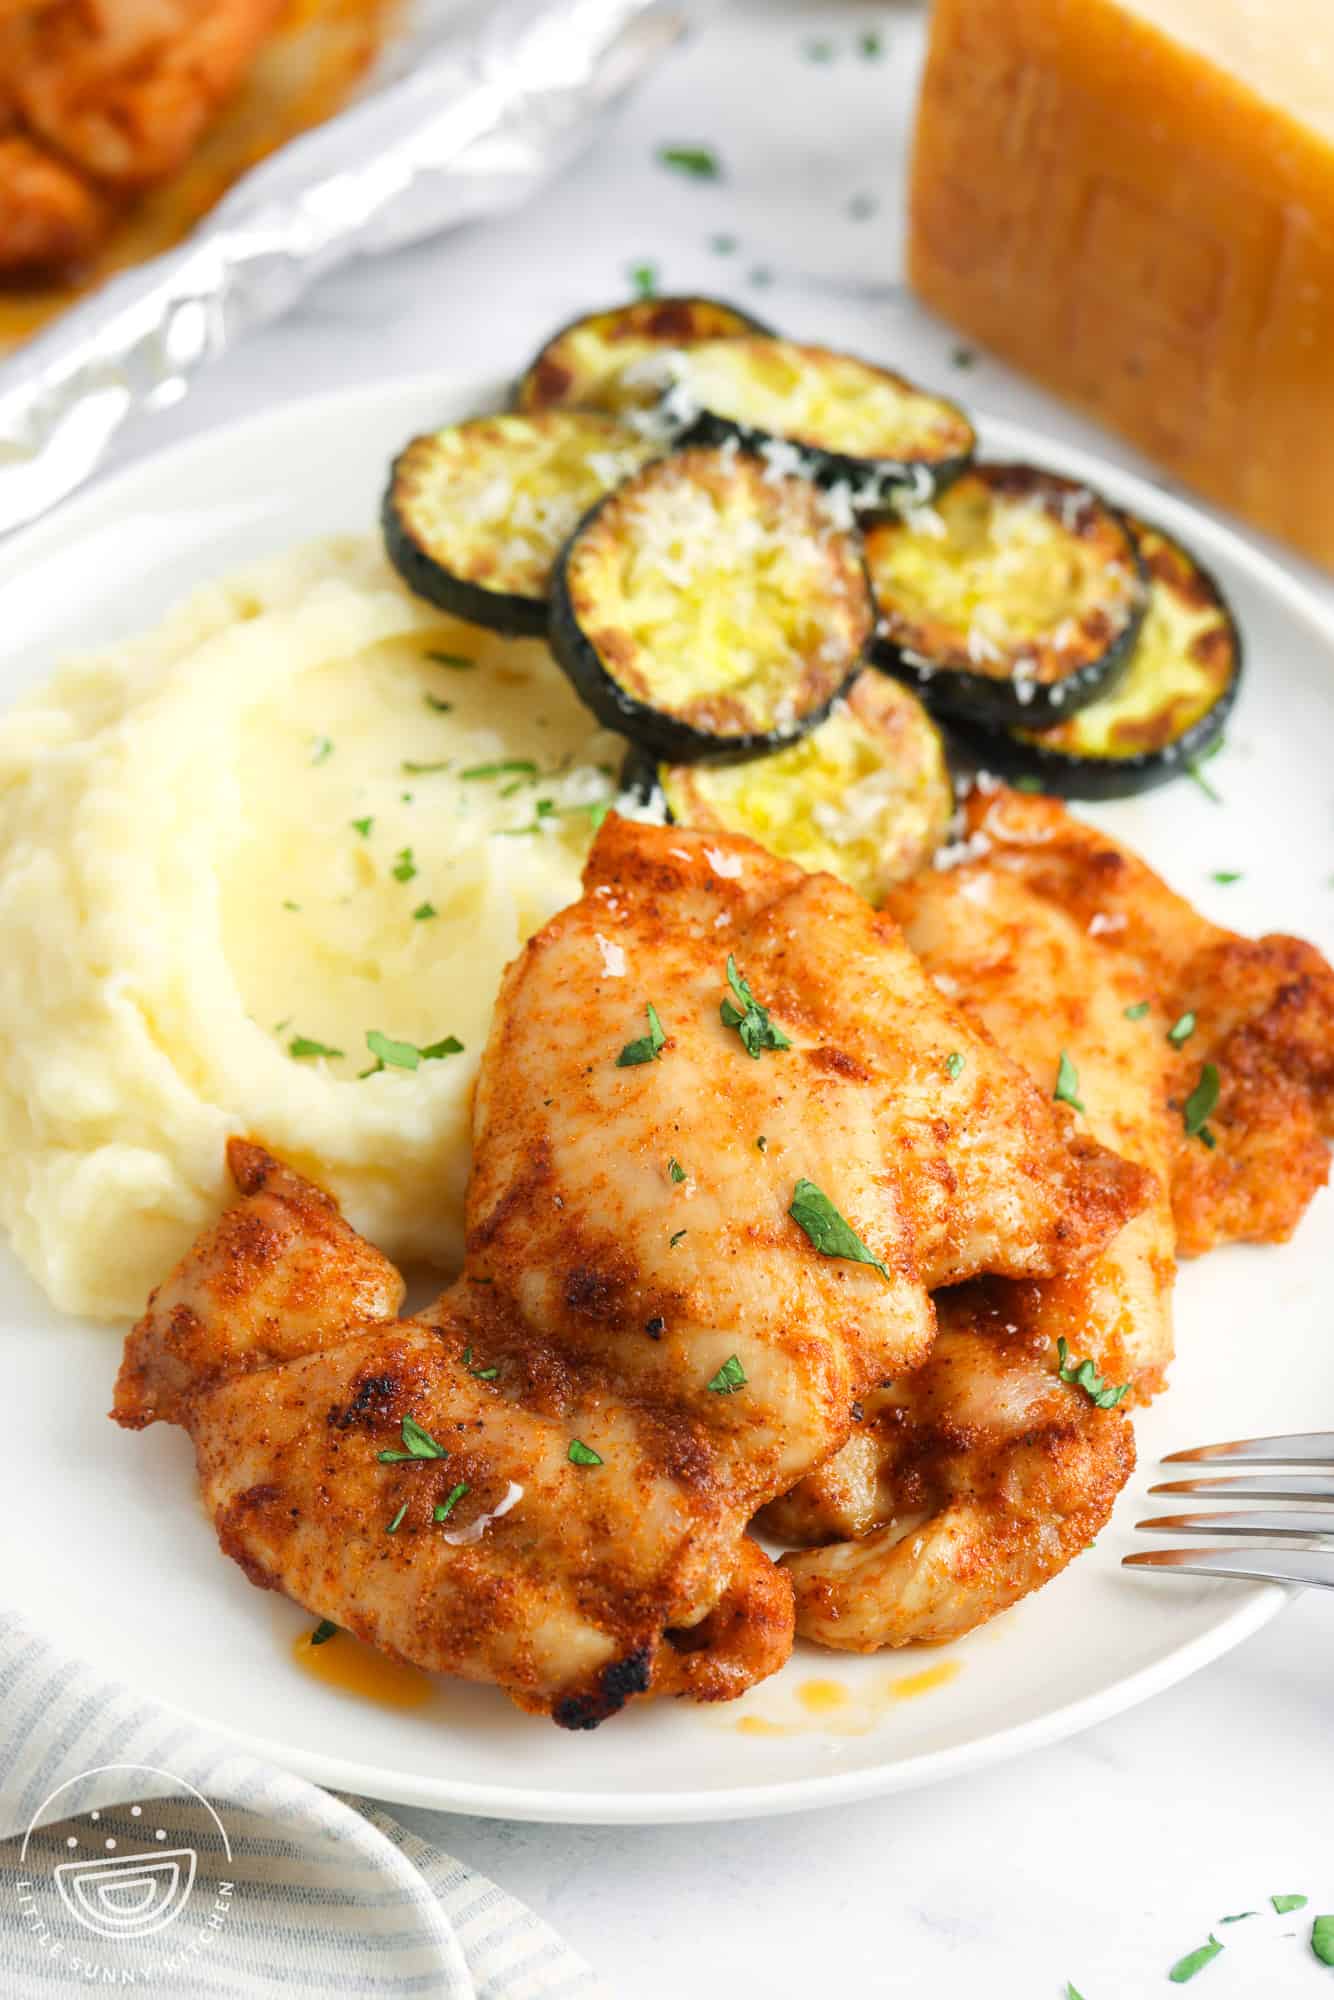 a dinner plate of baked boneless chicken thighs, zucchini, and mashed potatoes